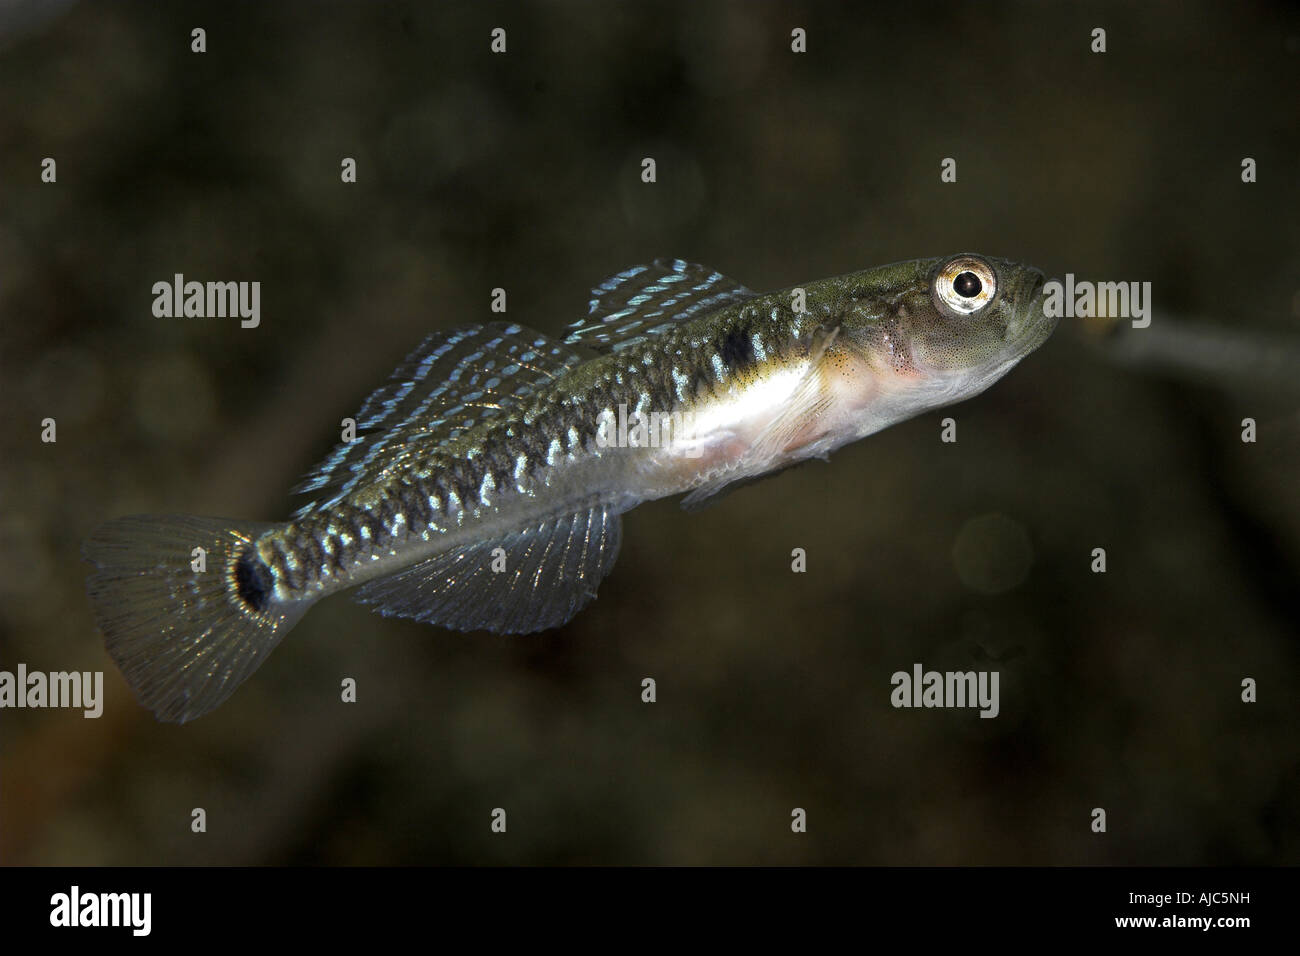 two-spotted goby, two-spot goby (Gobiusculus flavescens, Gobius flavescens, Gobius ruthensparri), side view Stock Photo